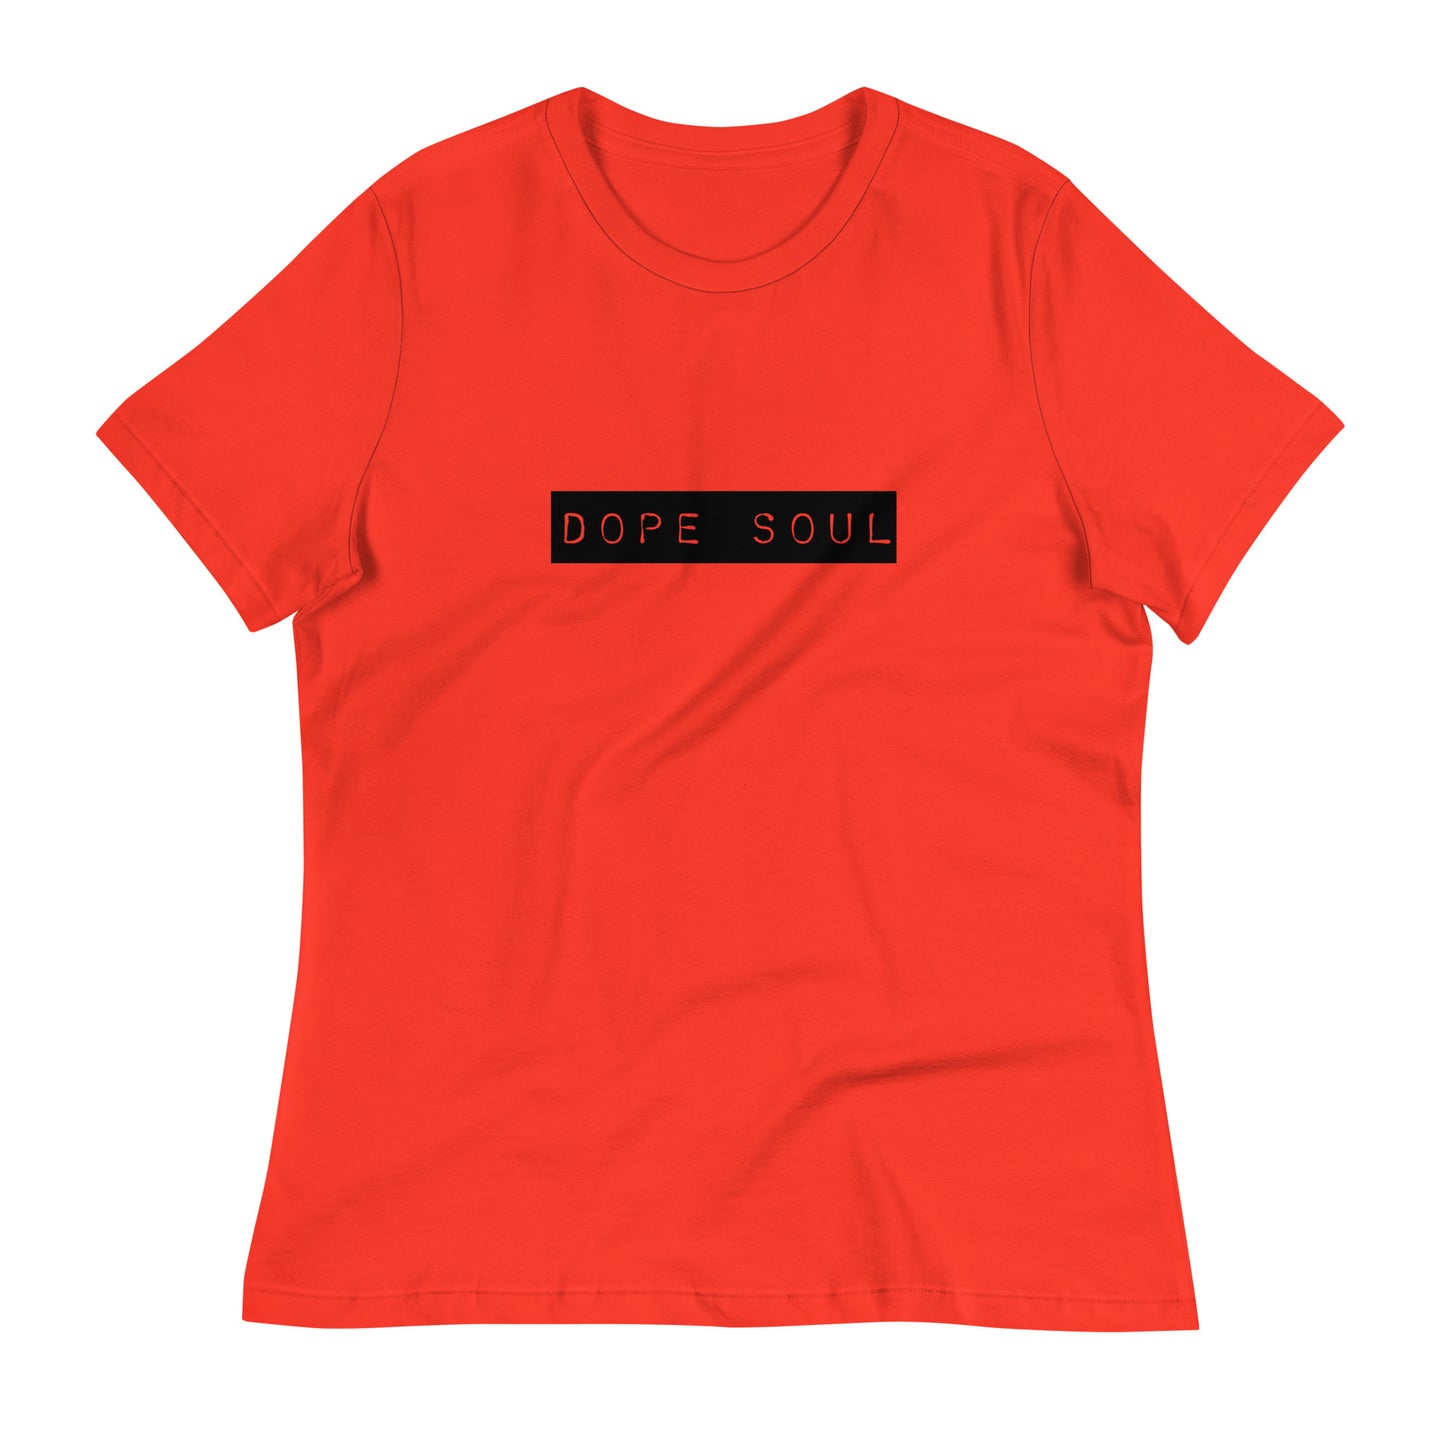 Dope Soul Women's Relaxed T-Shirt